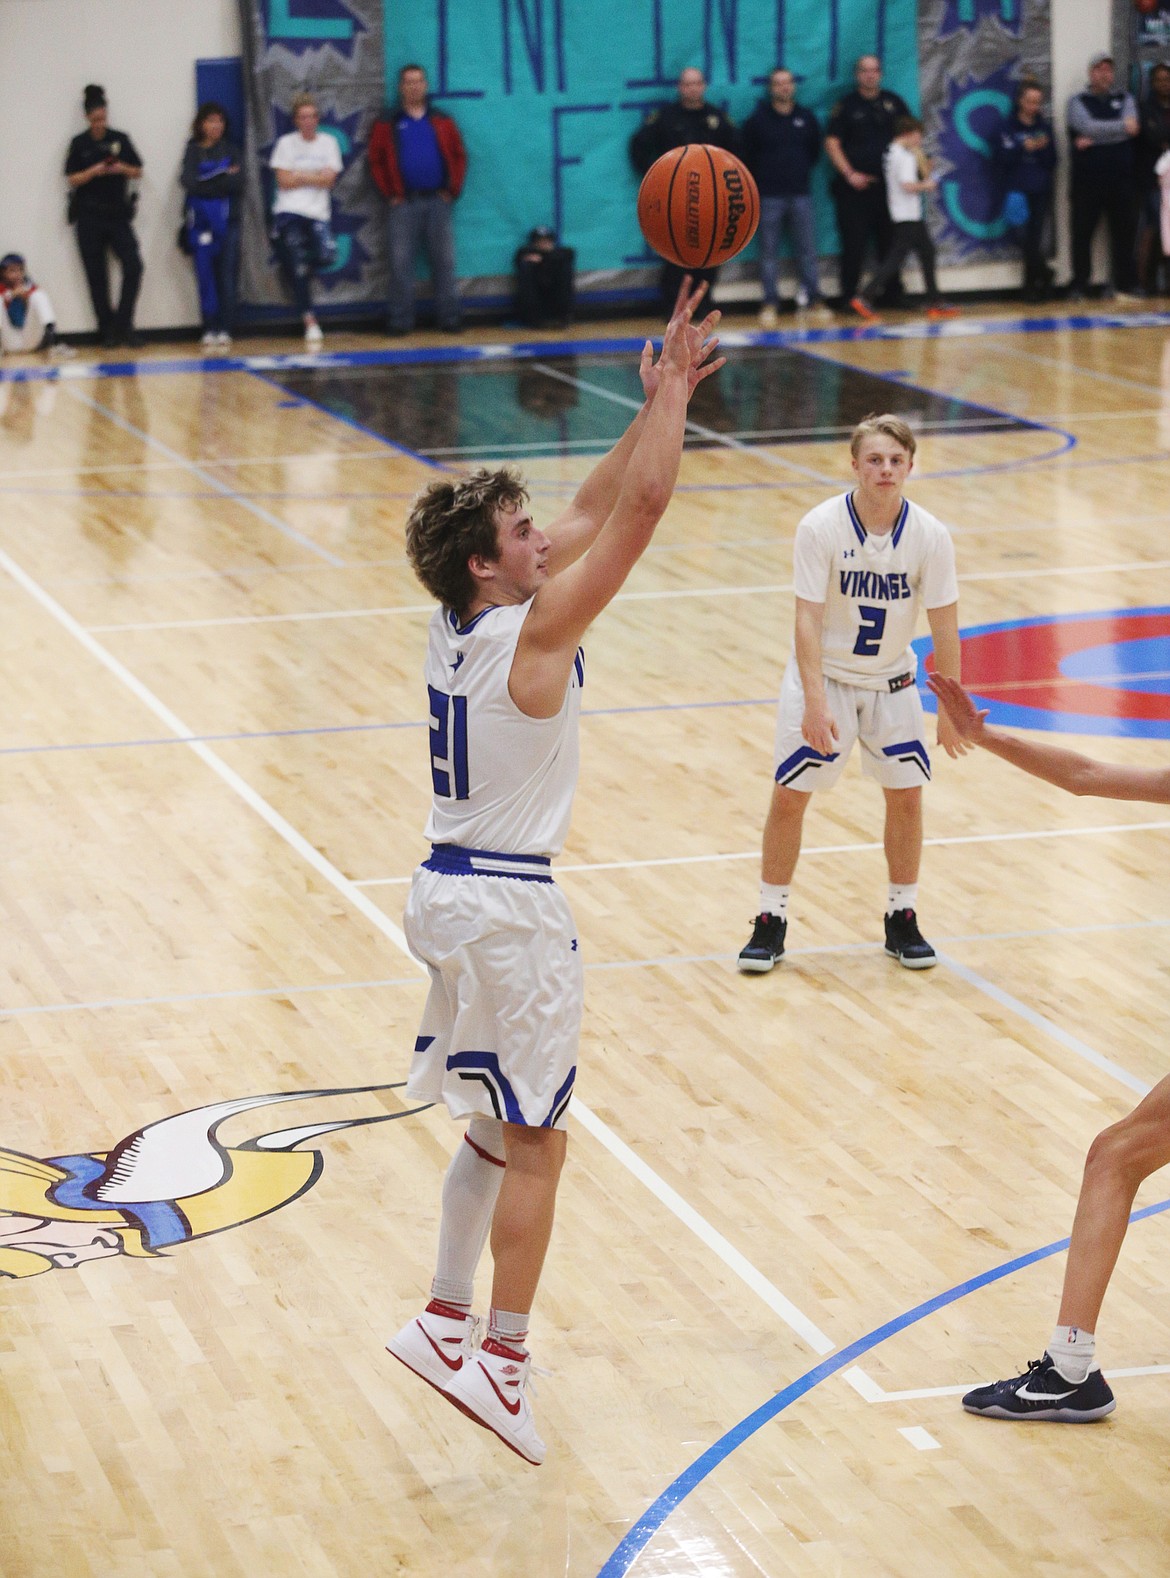 Coeur d'Alene's Carter Friesz shoots a 3-pointer in the first half of Friday night's Fight for the Fish game against Lake City. (LOREN BENOIT/Press)